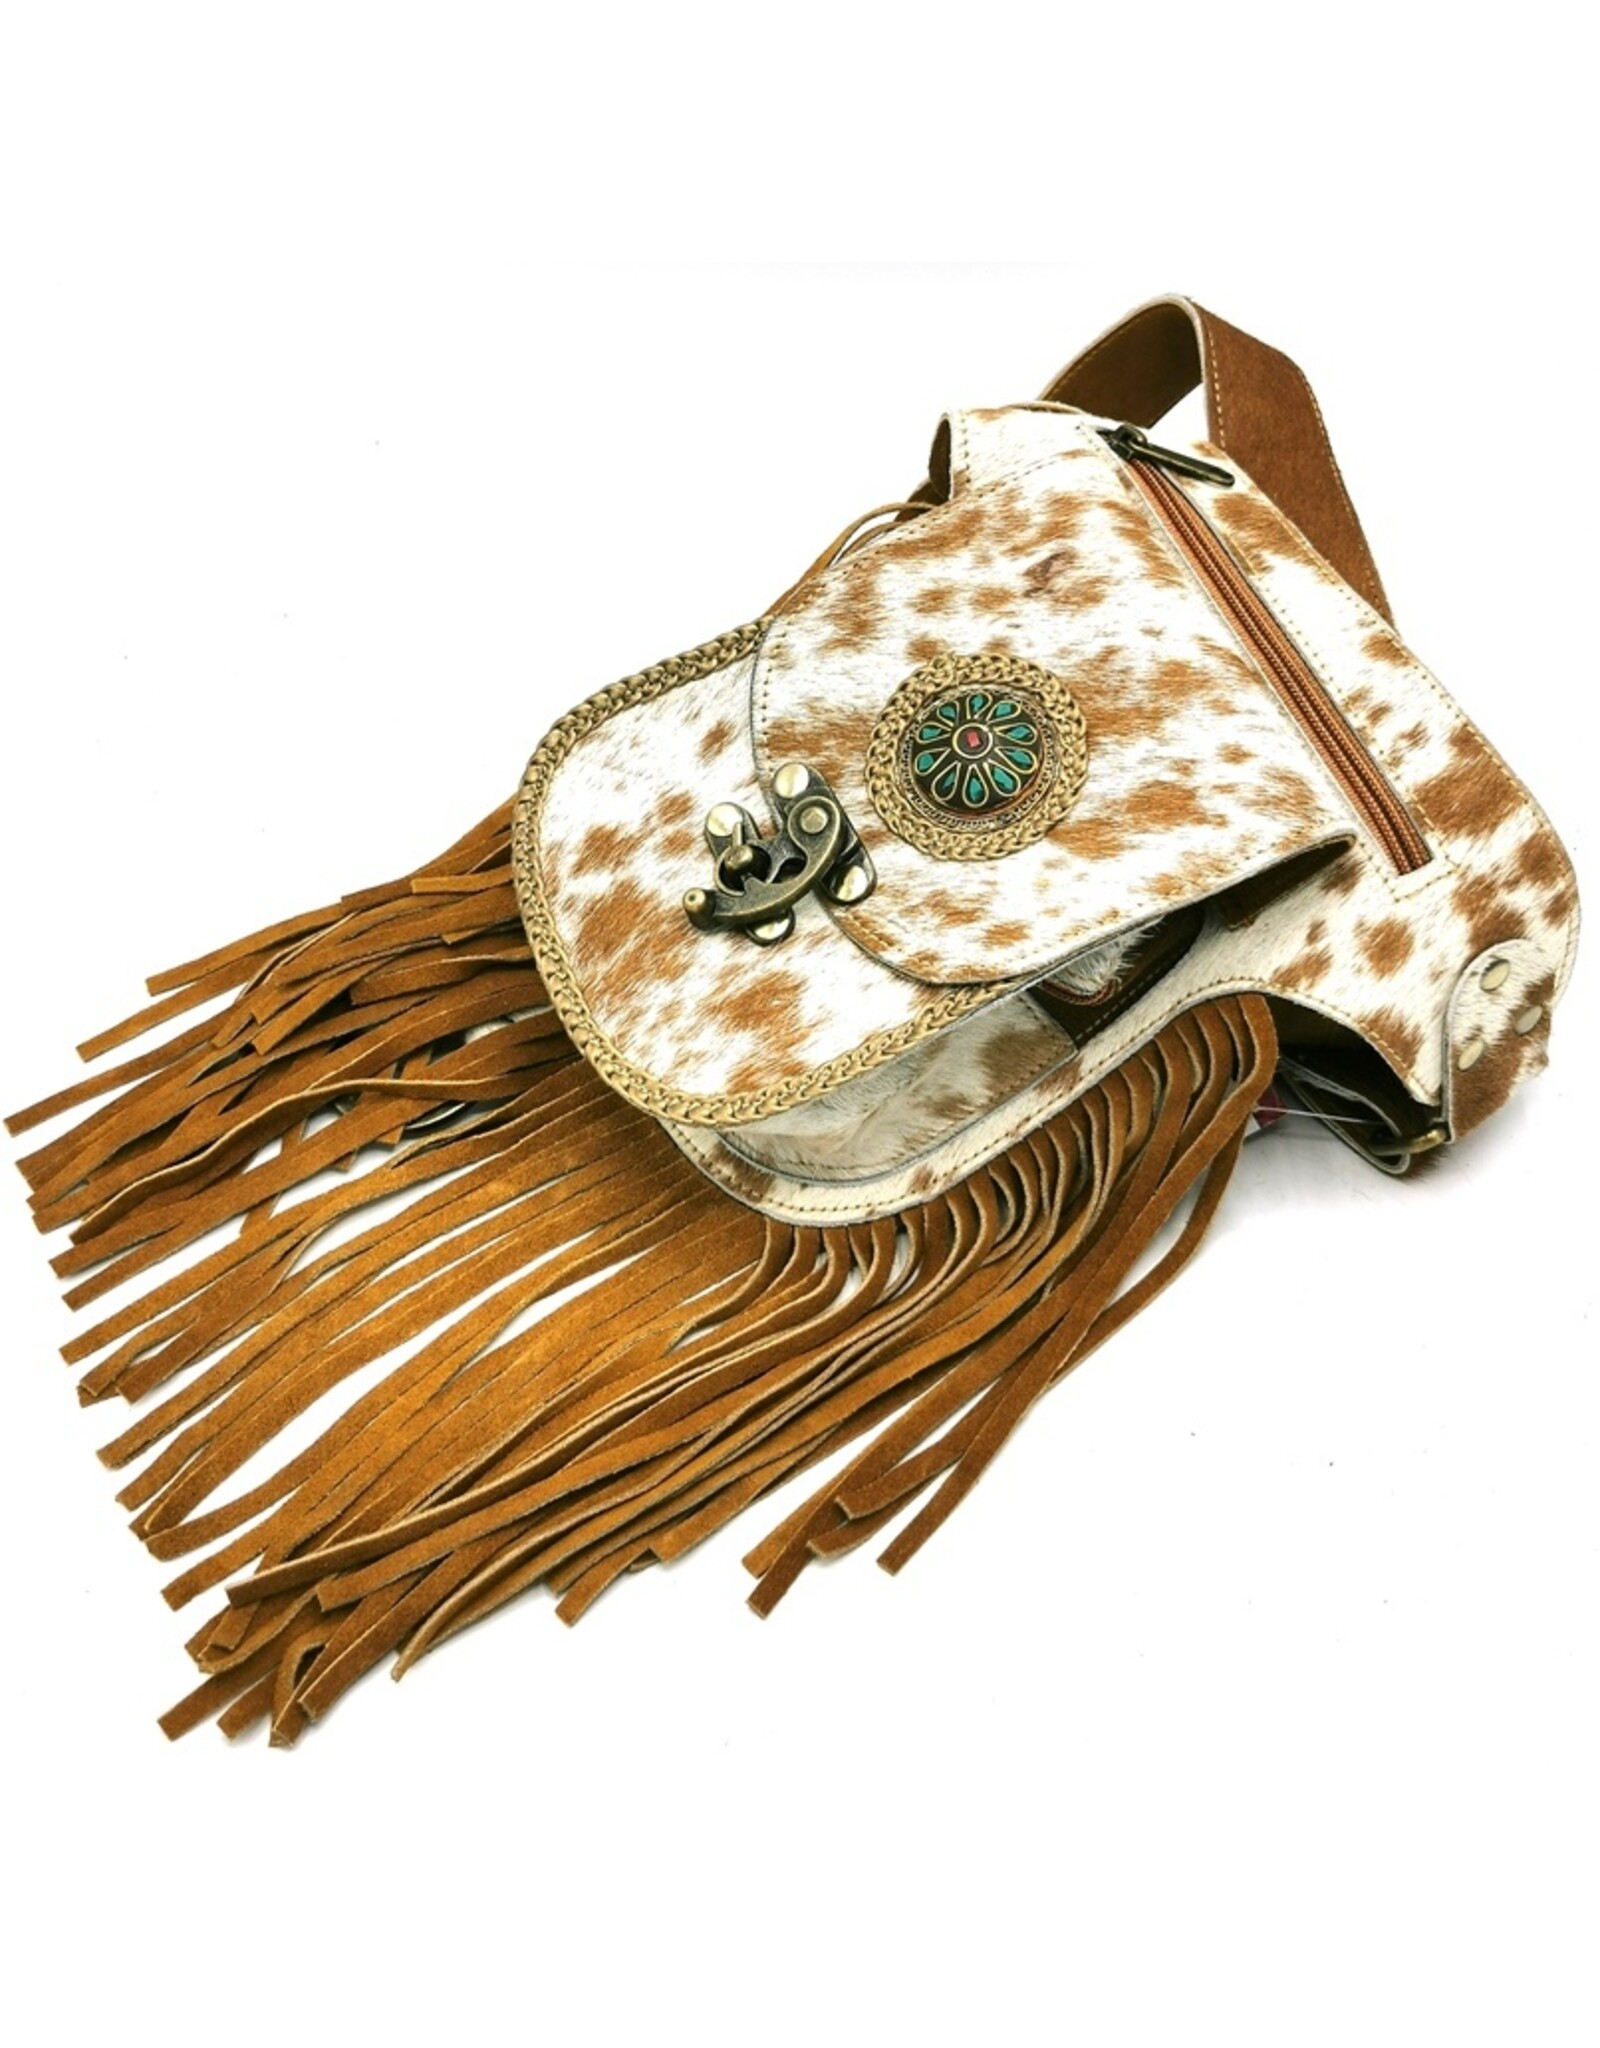 Trukado Small leather bags, clutches and more - Cowhide waist bag with fringes and hook